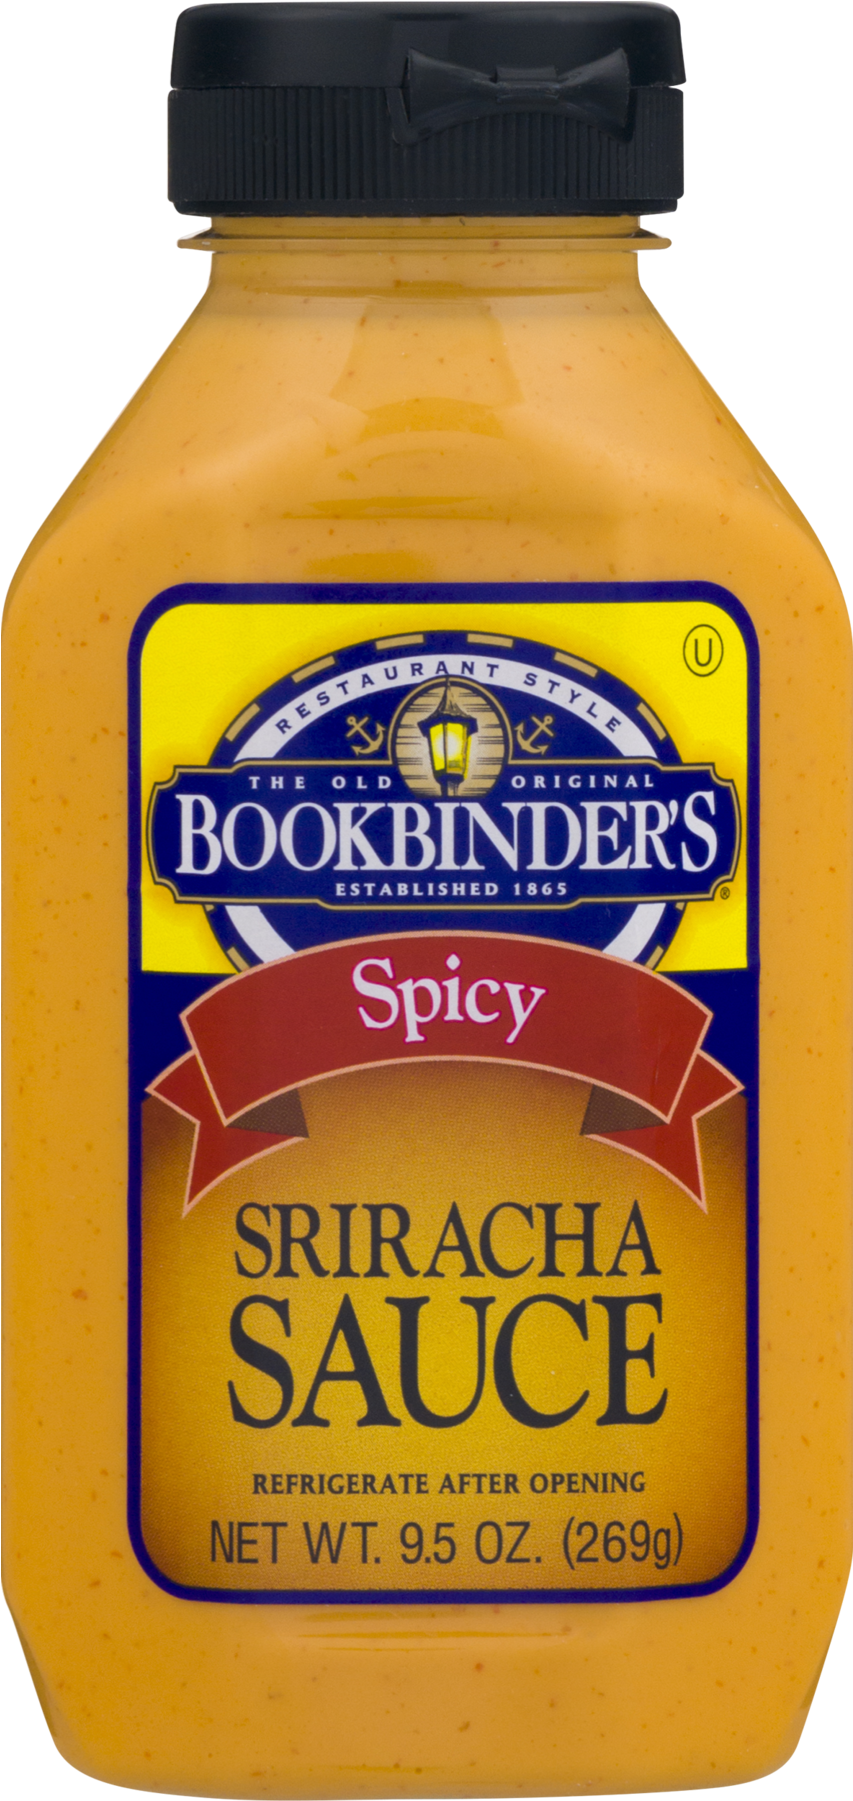 A Bottle Of Sauce With A Label